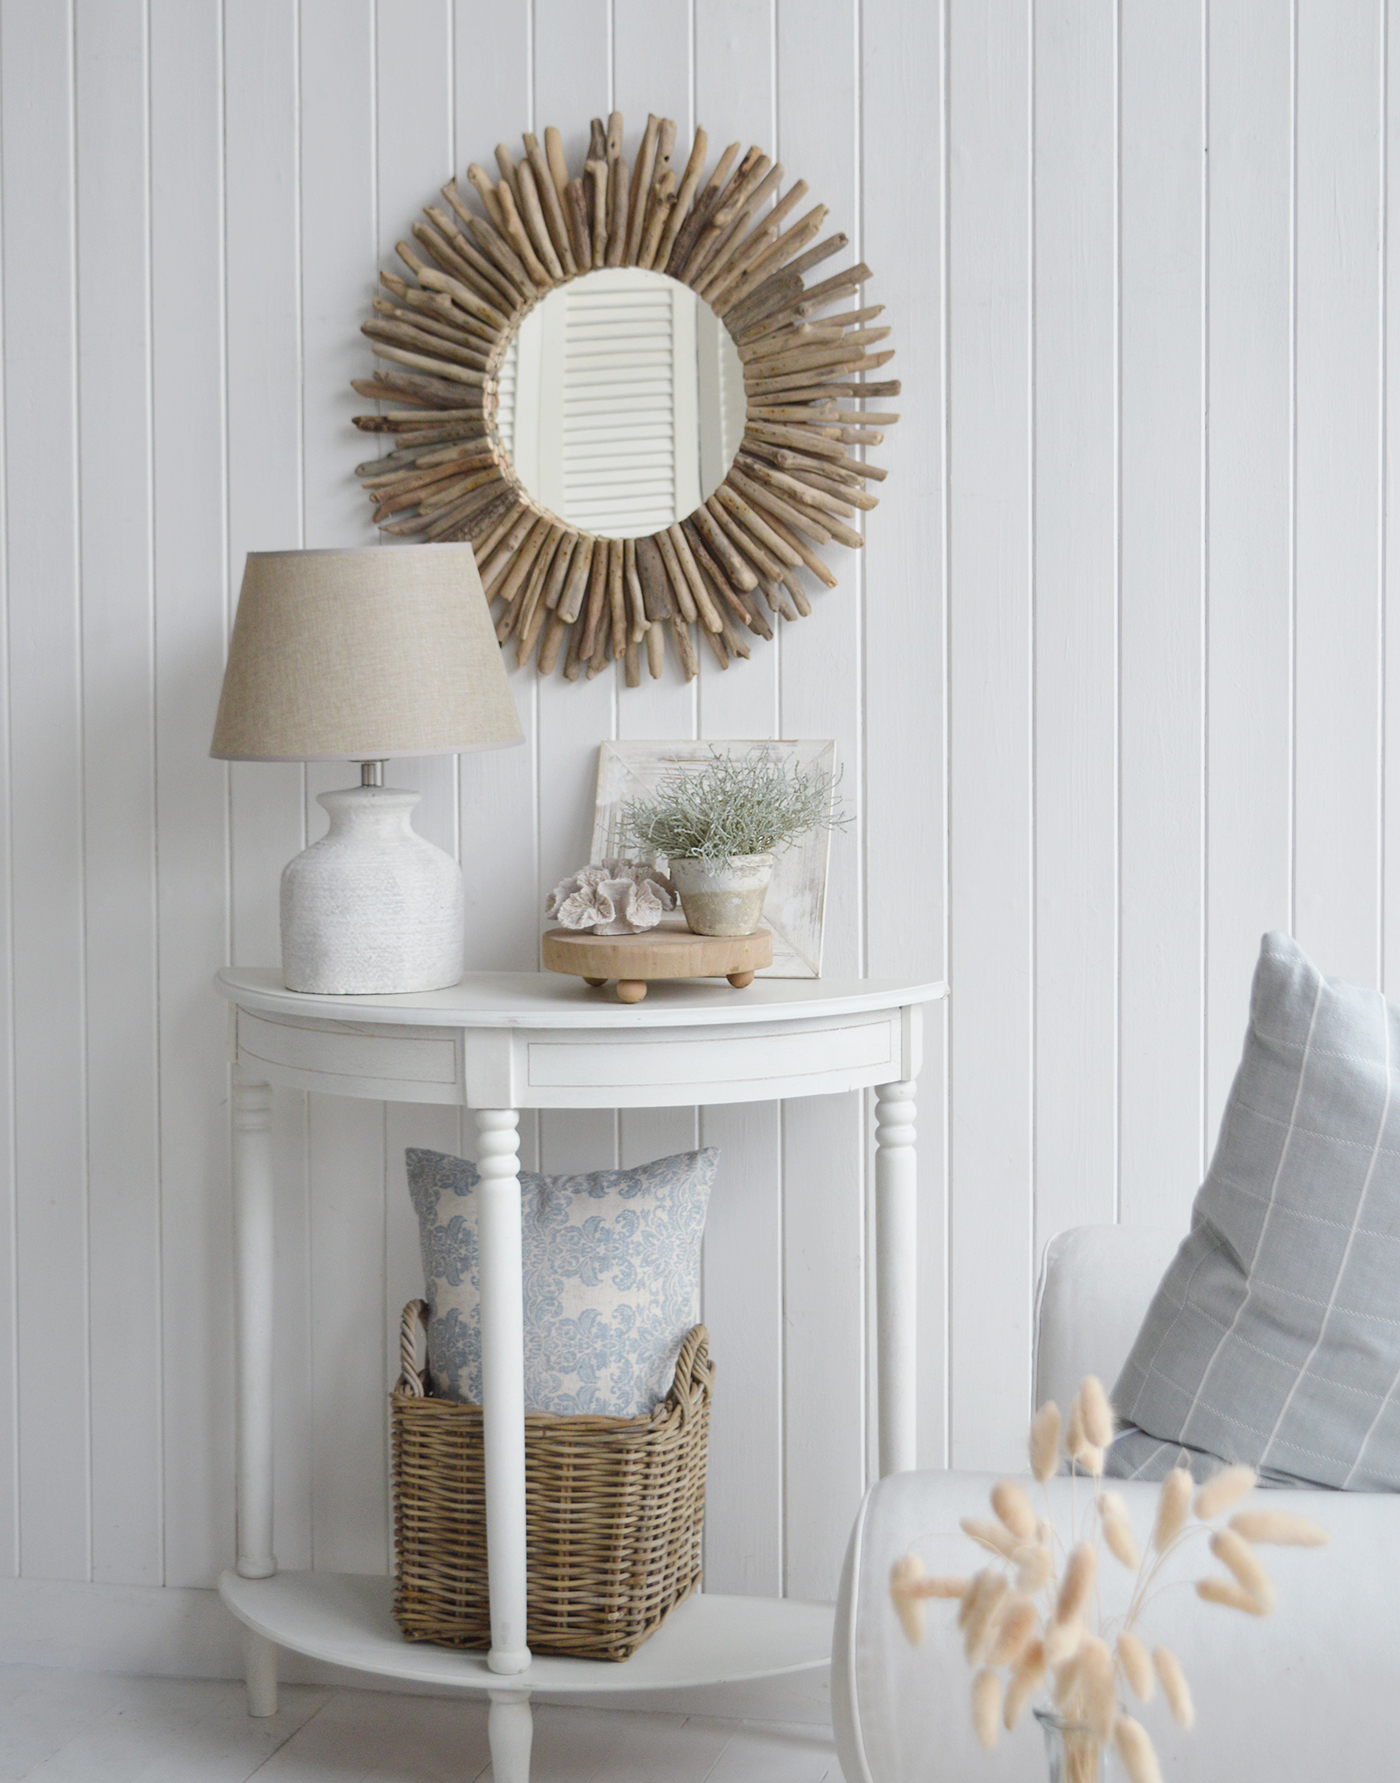 Coastal mirror crafted from driftwood pieces to complement our Beach house style New England furniture, shown here above the white Cape Ann console table